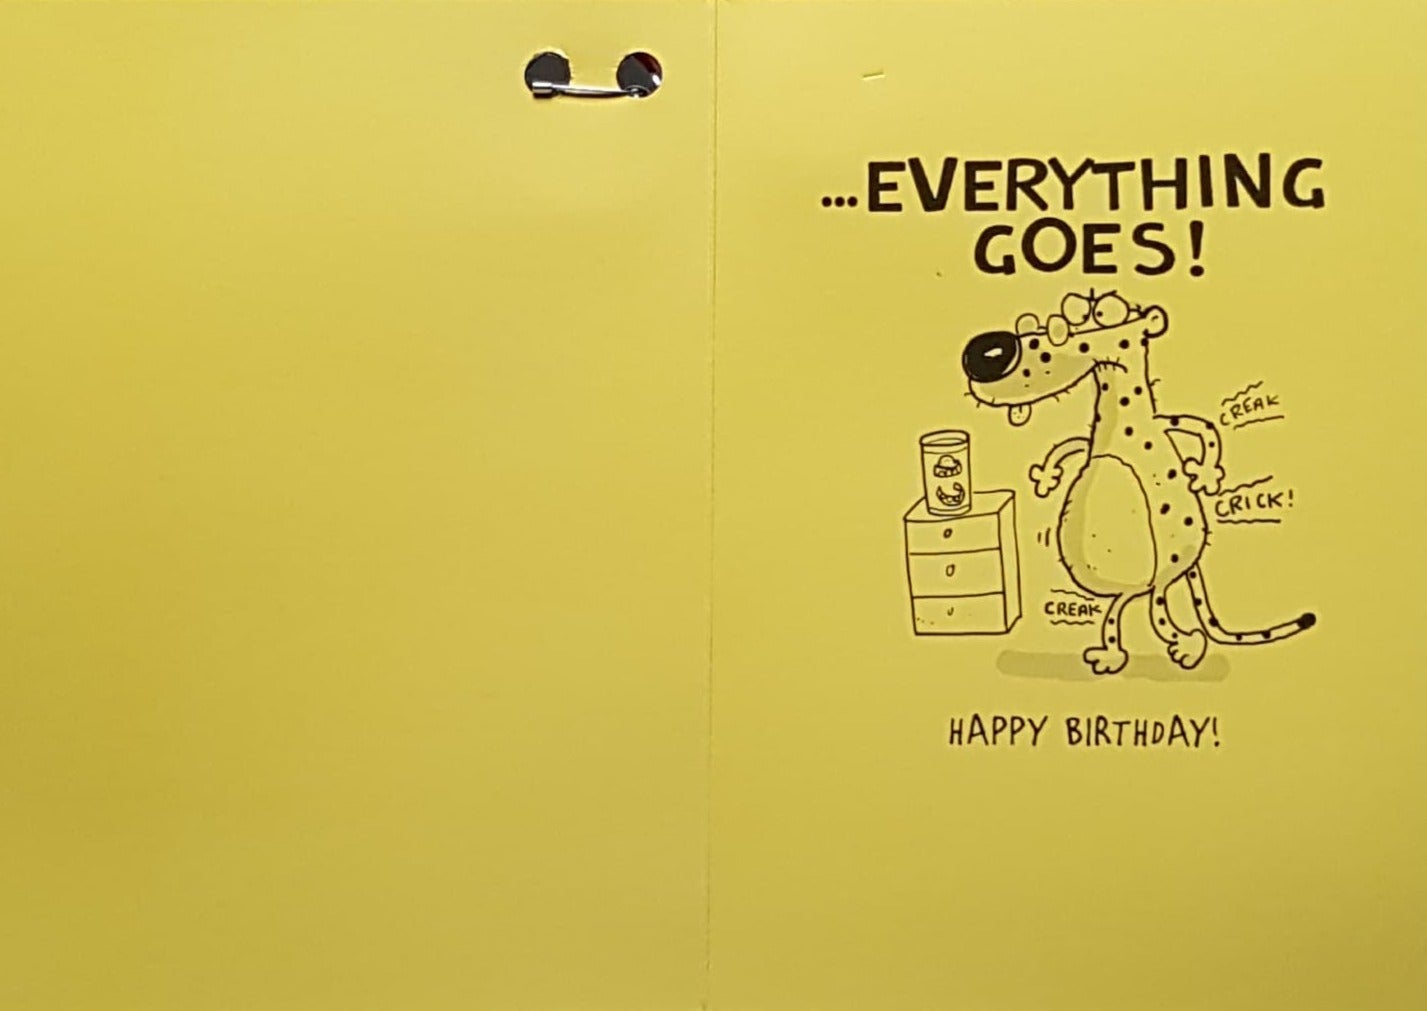 Birthday Card - Older & Wise (Humour)